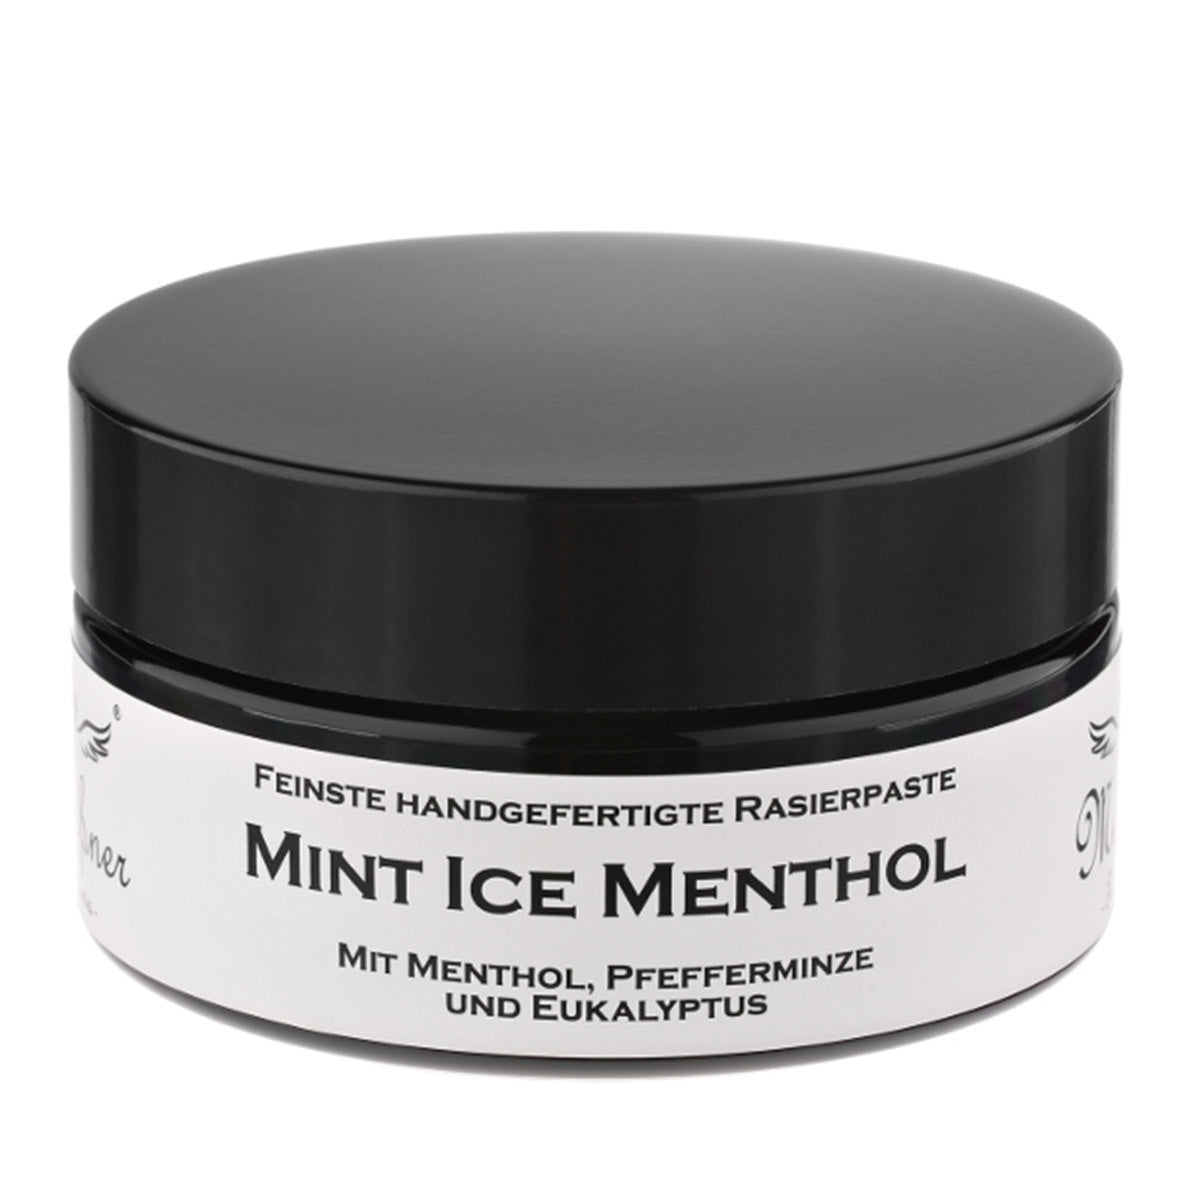 Primary image of Mint Ice Menthol